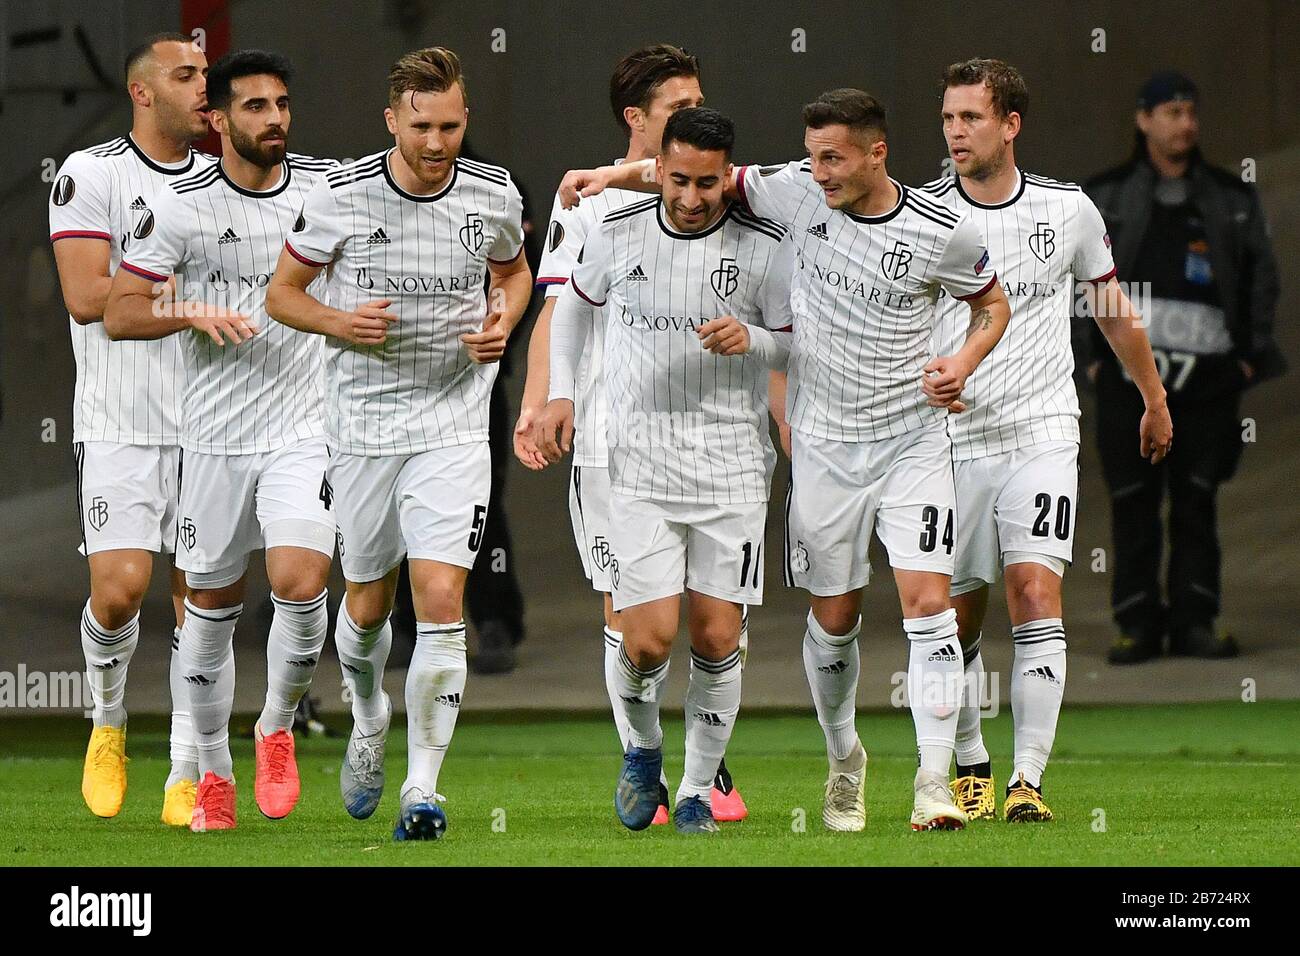 Frankfurt, Germany. 12th Mar, 2020. Samuele Campo (3rd R) of Basel  celebrates scoring with his teammates during the UEFA Champions League  round of 16 first leg match between Eintracht Frankfurt and FC